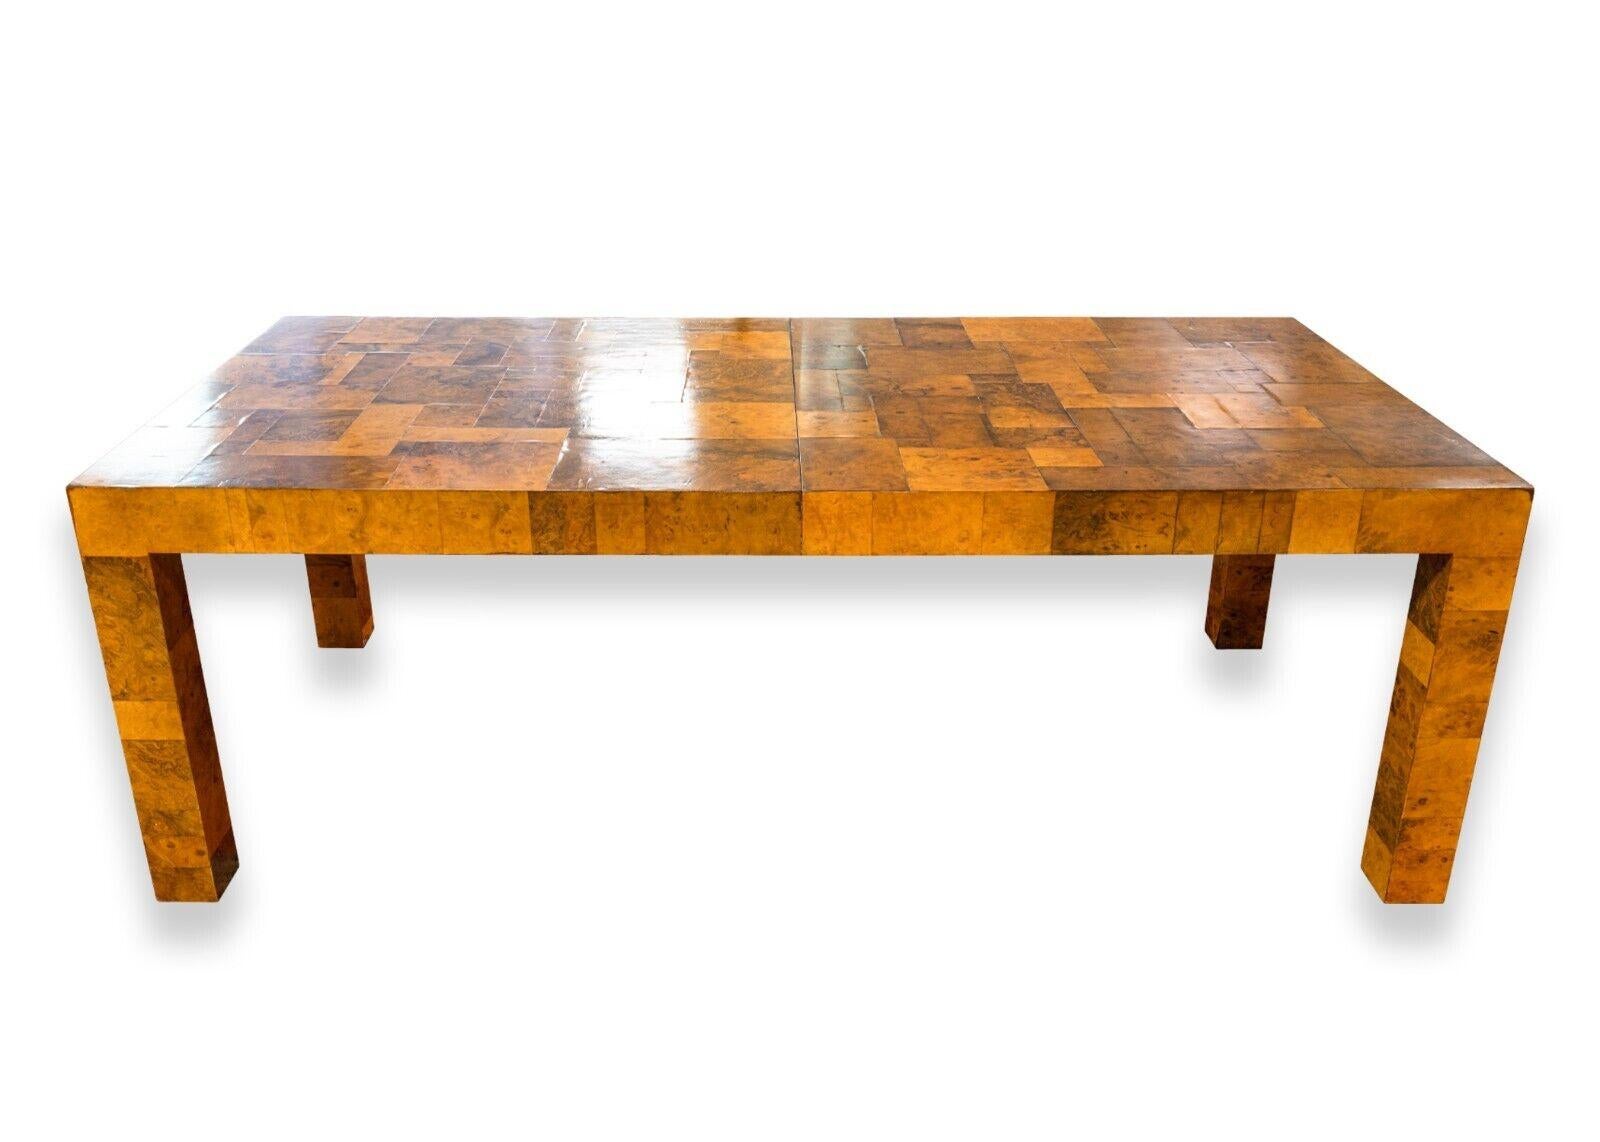 A mid century modern Paul Evans signed burlwood patchwork expandable dining table. This is a jaw-droppingly gorgeous table from Paul Evans featuring one of his many iconic designs. This piece features a lovely burlwood patchwork design. The burlwood